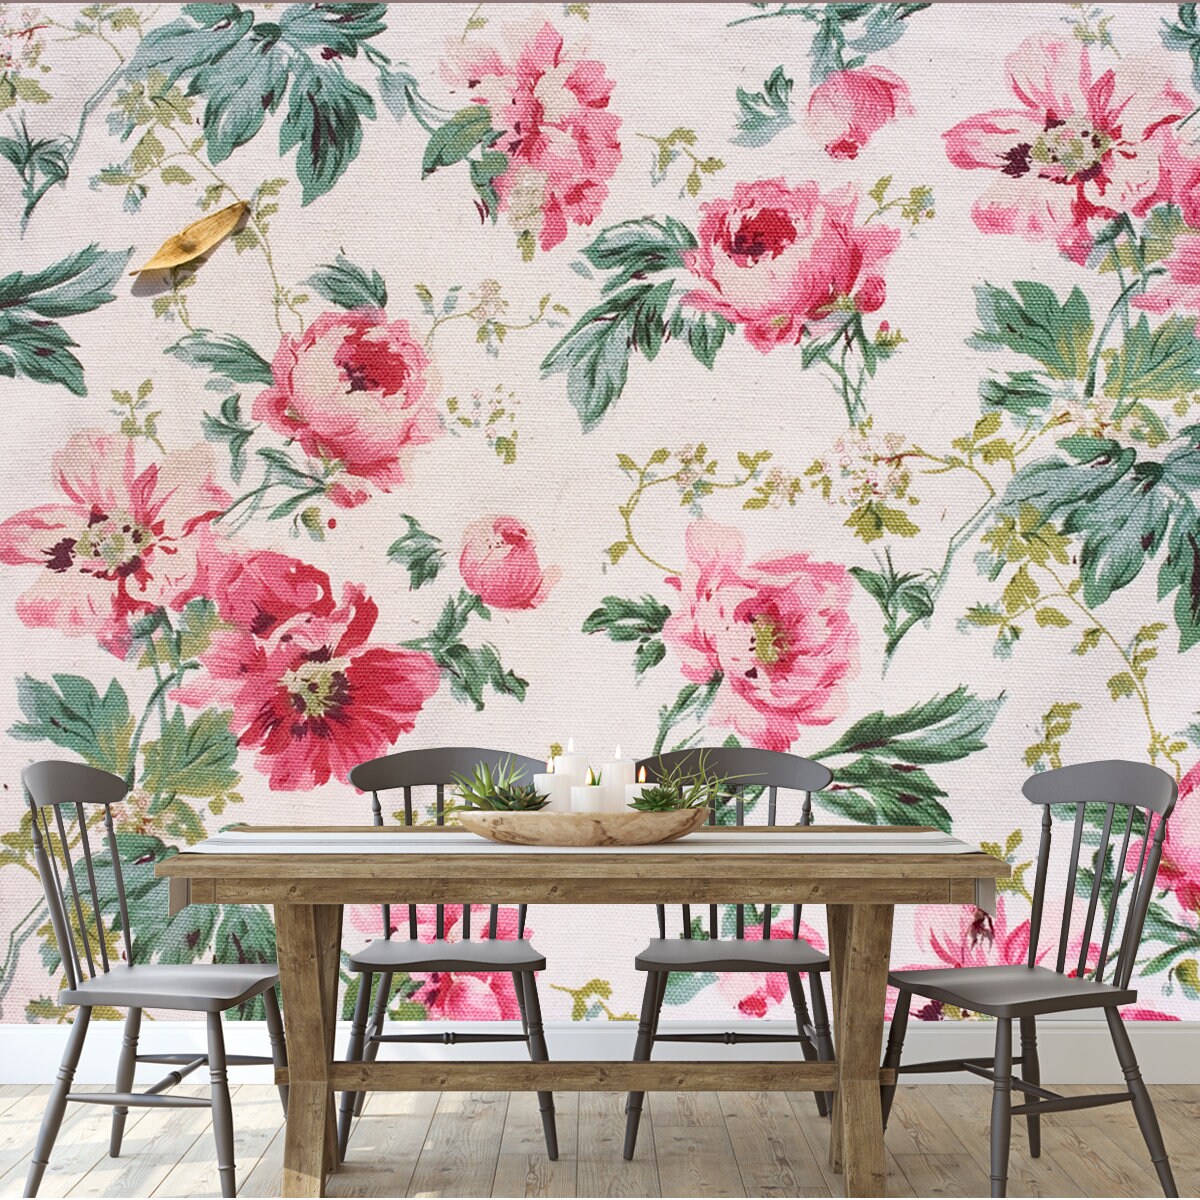 Fragment of Colorful Retro Tapestry Textile Pattern with Floral Ornament Wallpaper Dining Room Mural